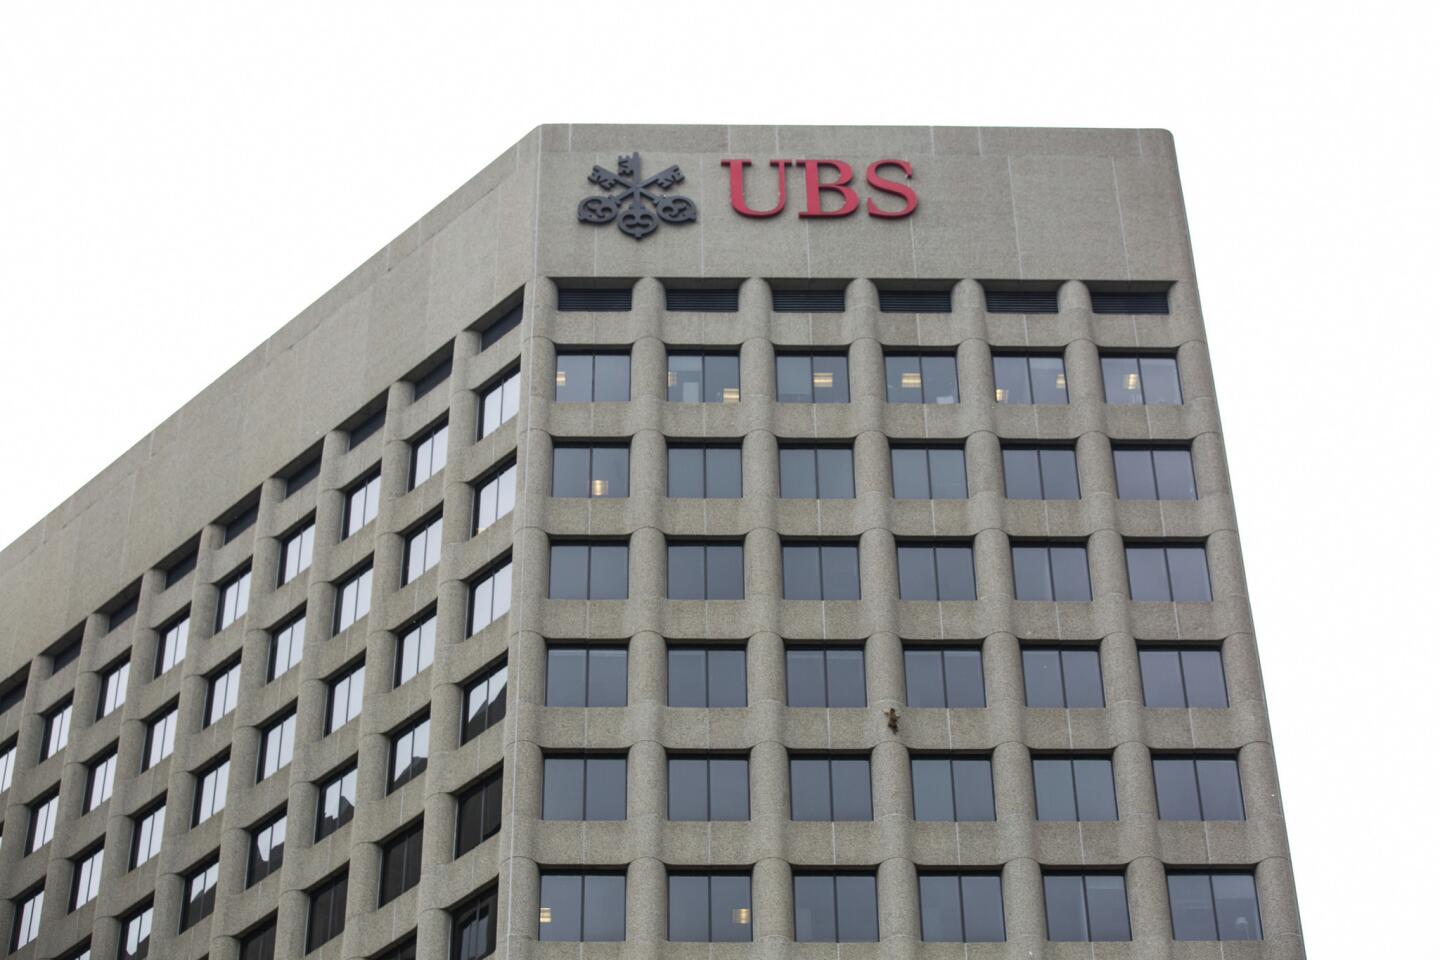 A raccoon scales the side of the UBS Tower in downtown St. Paul, Minn., on Tuesday, June 12, 2018. (Evan Frost/Minnesota Public Radio via AP)